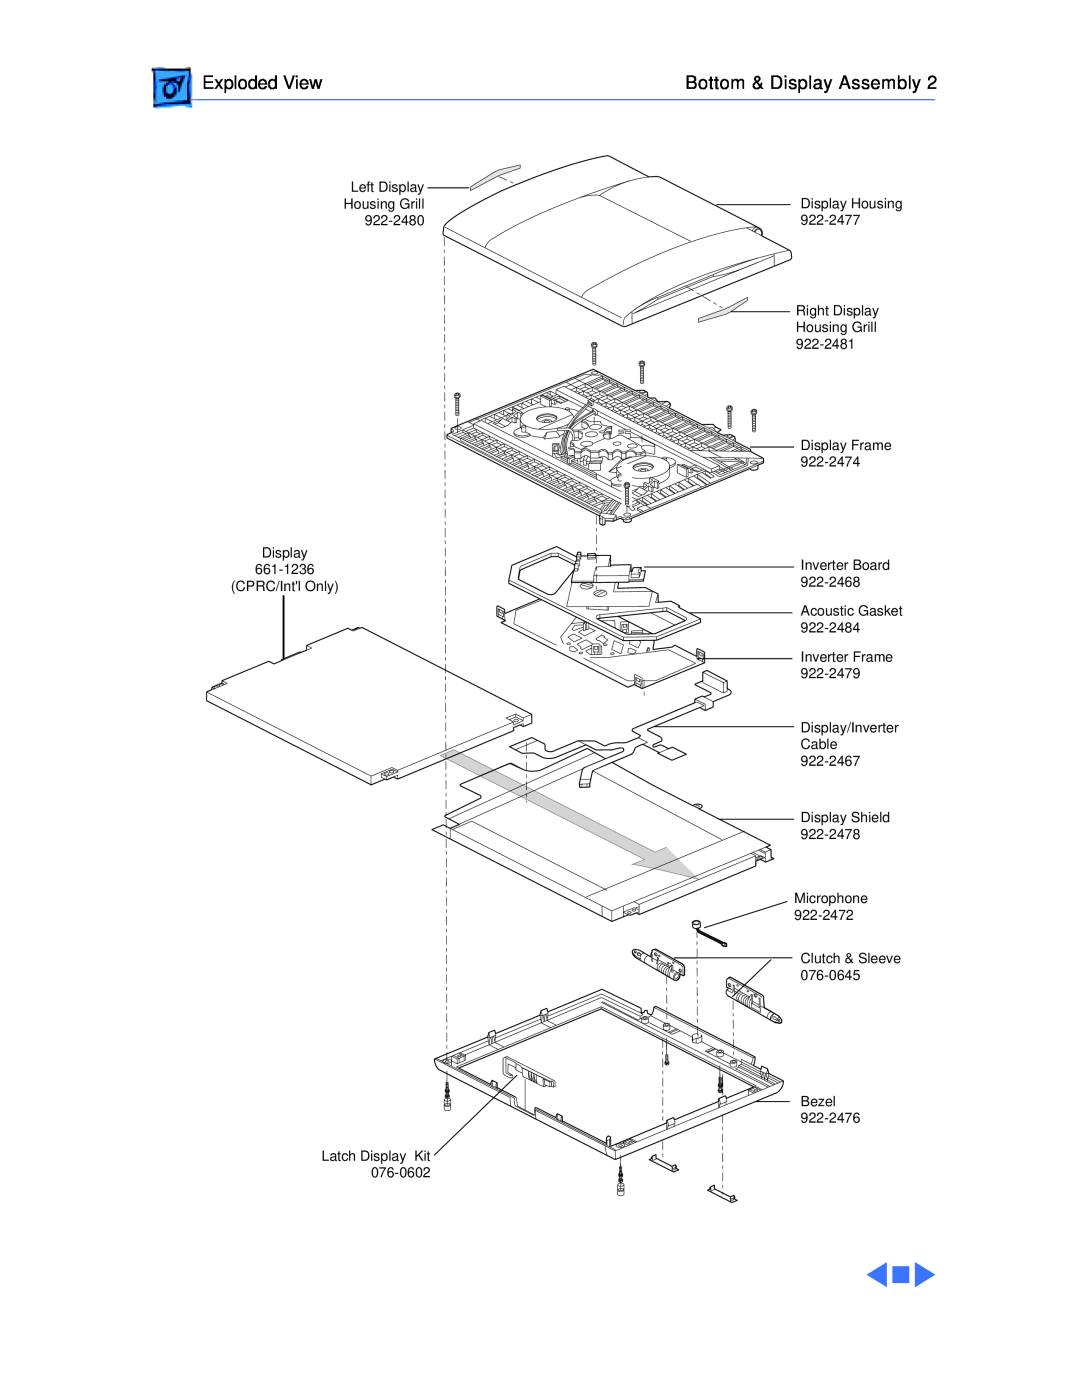 Apple G3 Exploded View, Bottom & Display Assembly, Left Display Housing Grill 922-2480 Display 661-1236 CPRC/Intl Only 